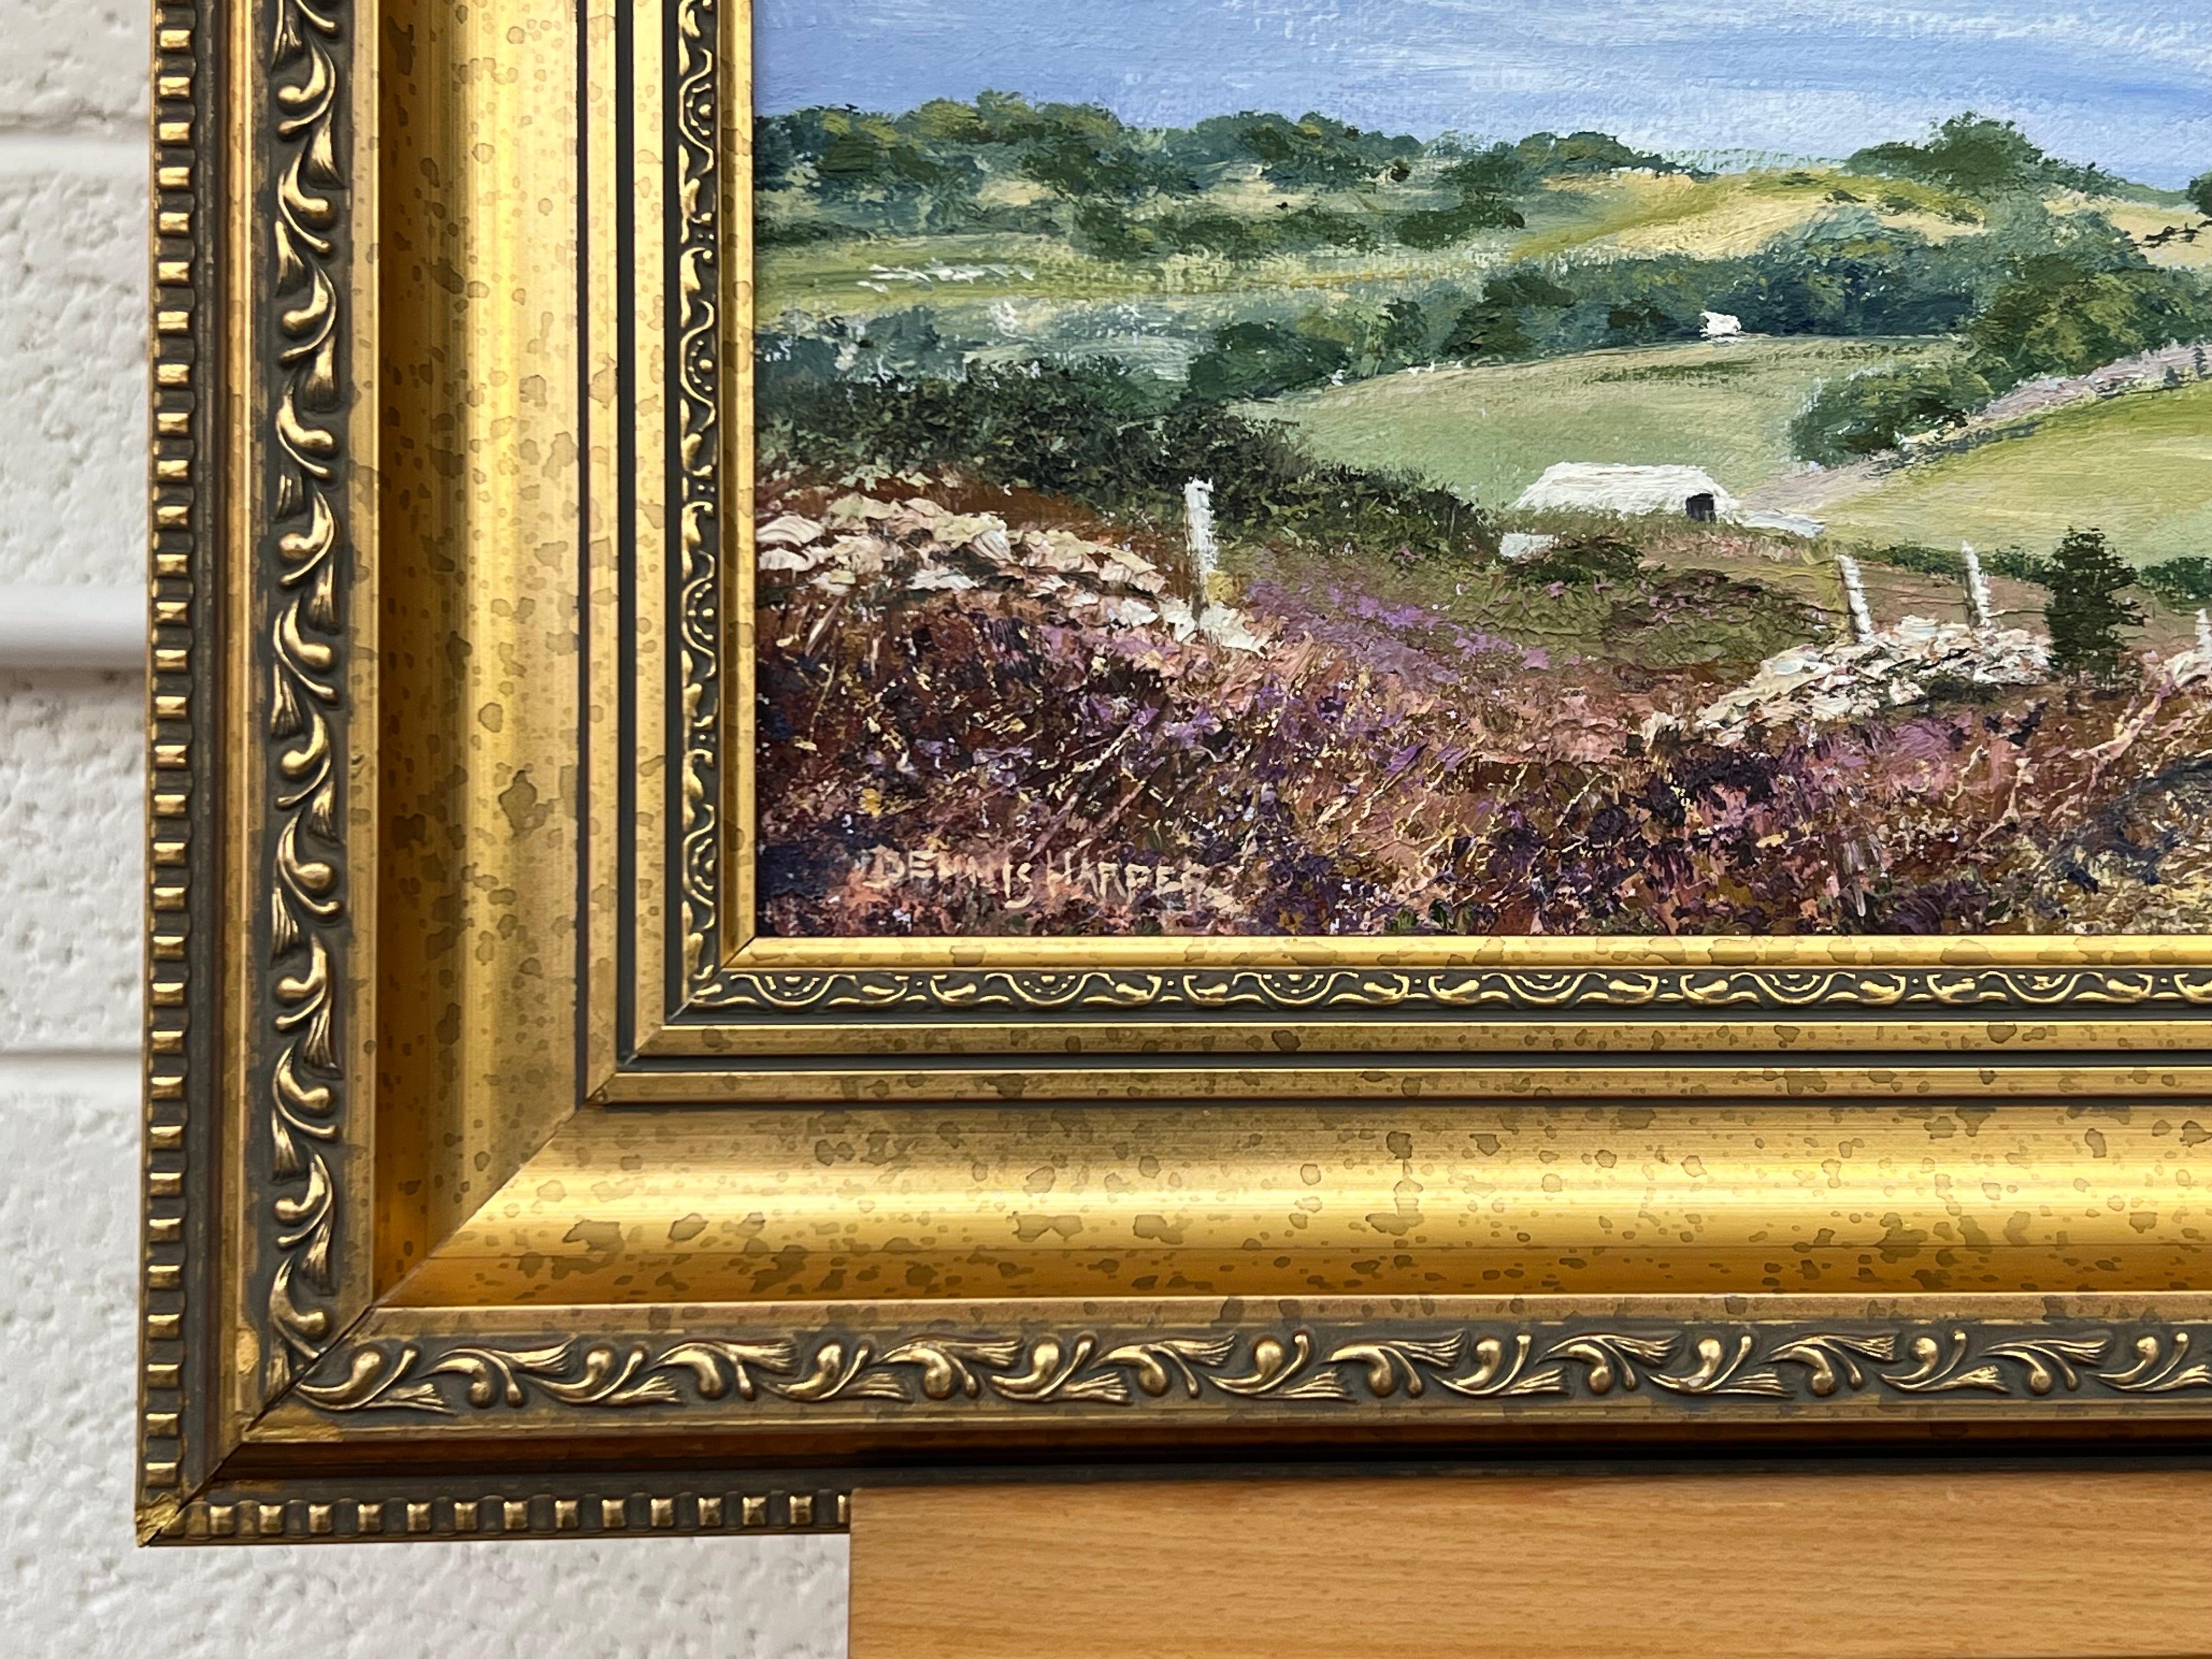 Oil Painting of the English Countryside by Dennis Harper, ( b. 1940) 
British Artist known for his Realist Oil Paintings, Harper is an active member of several art societies and exhibited widely in the UK. 

Art measures 20 x 16 inches 
Frame